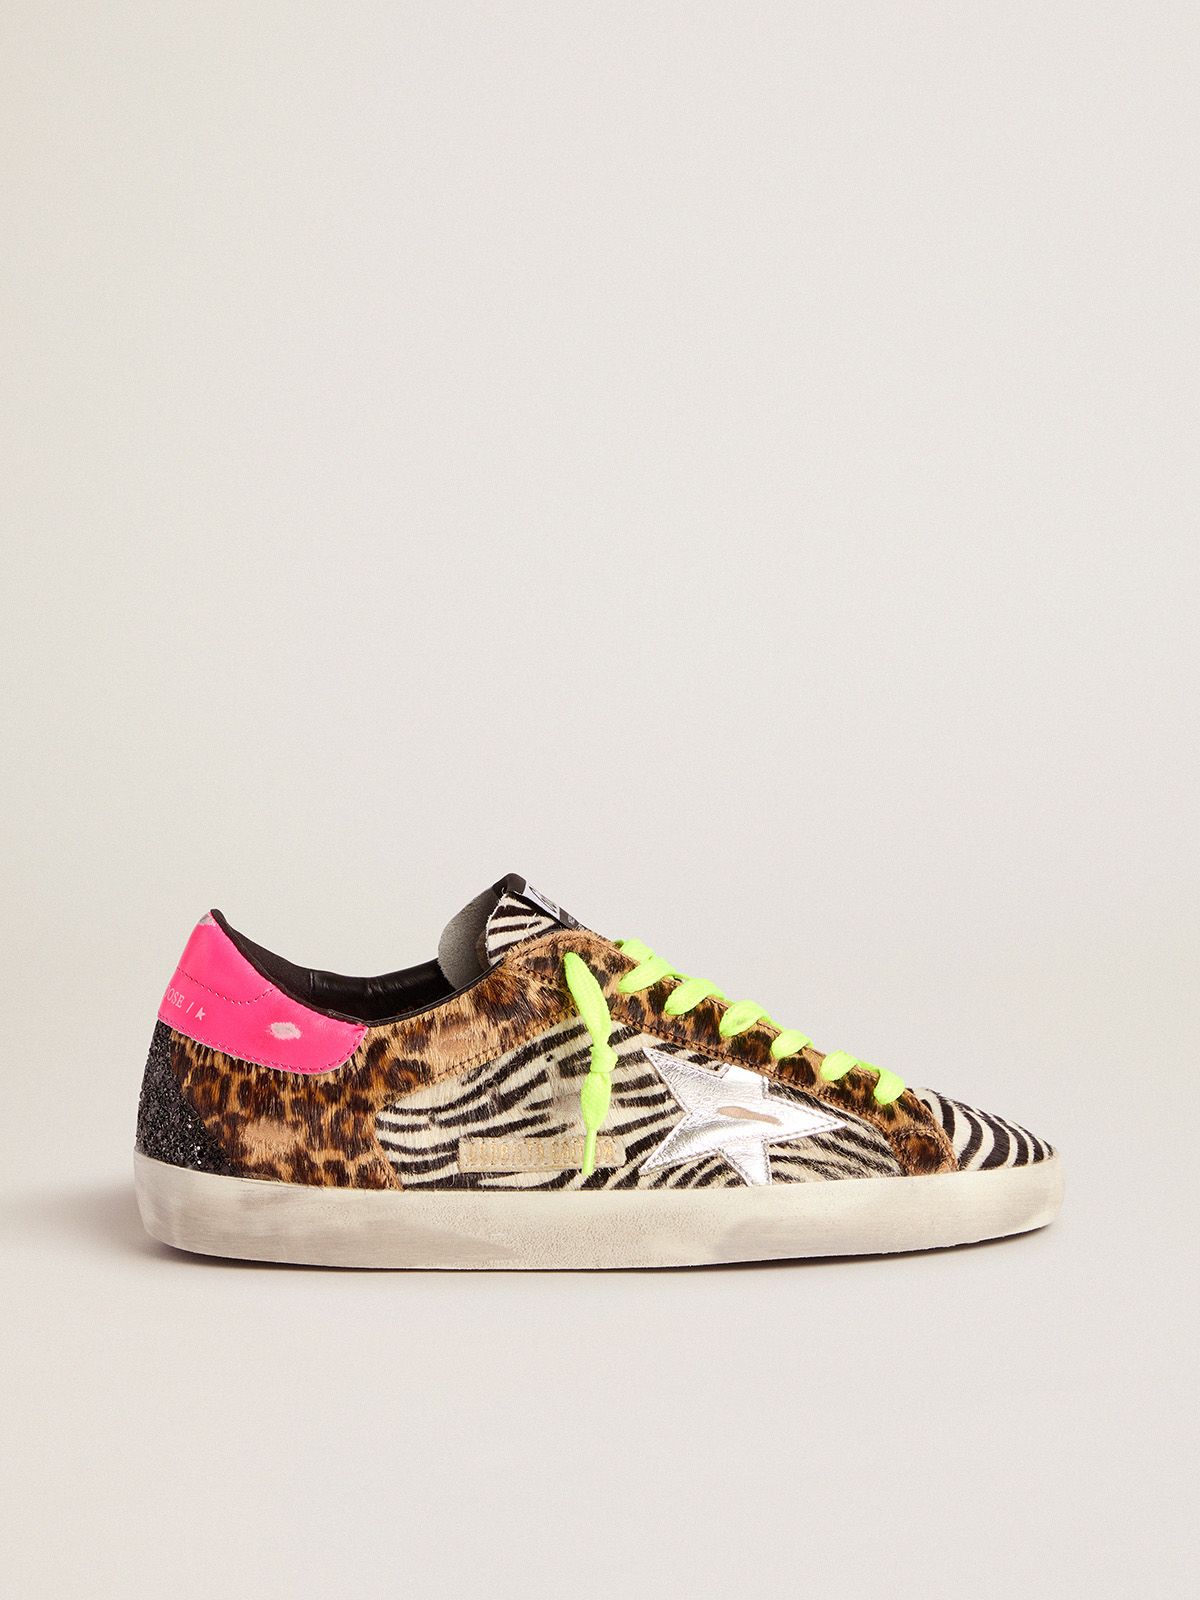 golden goose Super-Star glitter Edition Limited LAB Women's animal-print sneakers